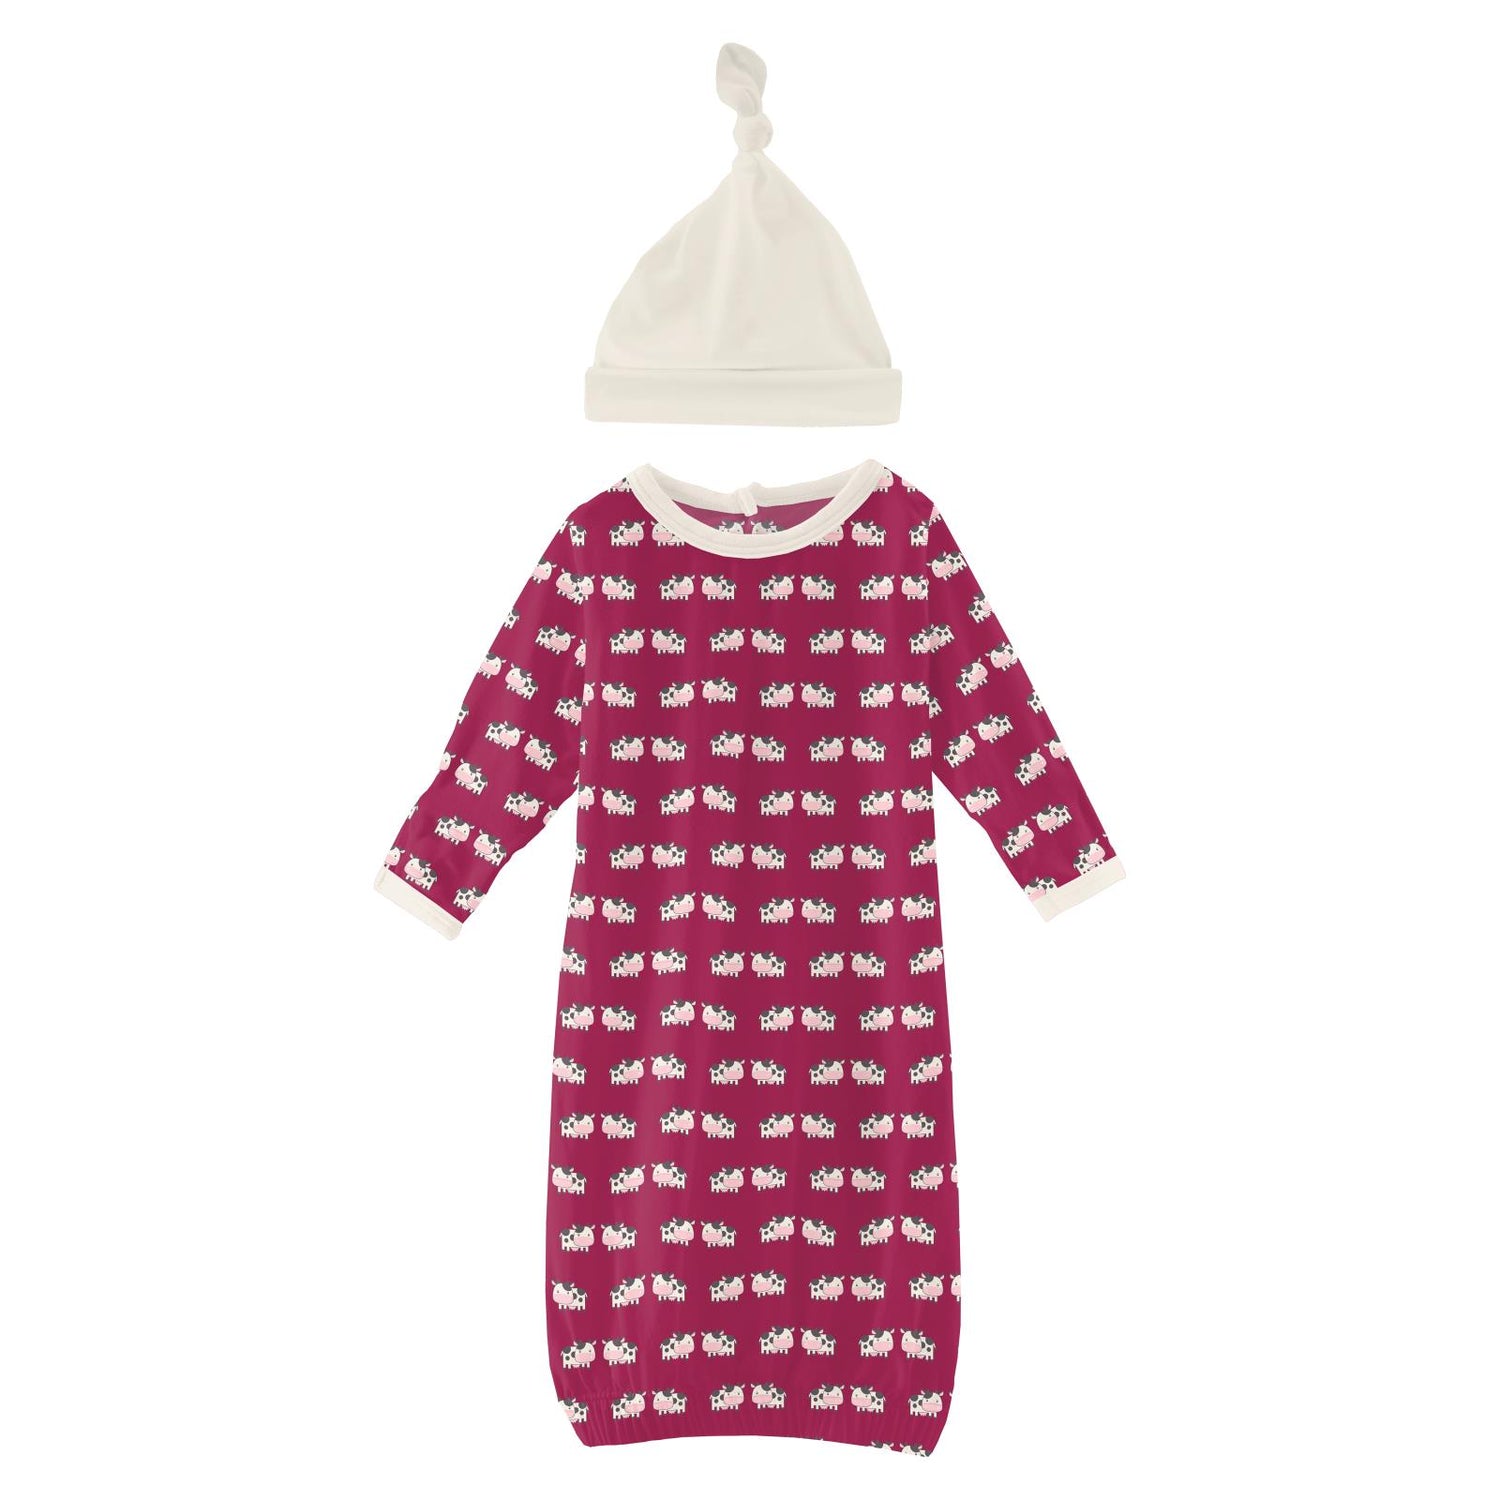 Print Layette Gown & Single Knot Hat Set in Berry Cow